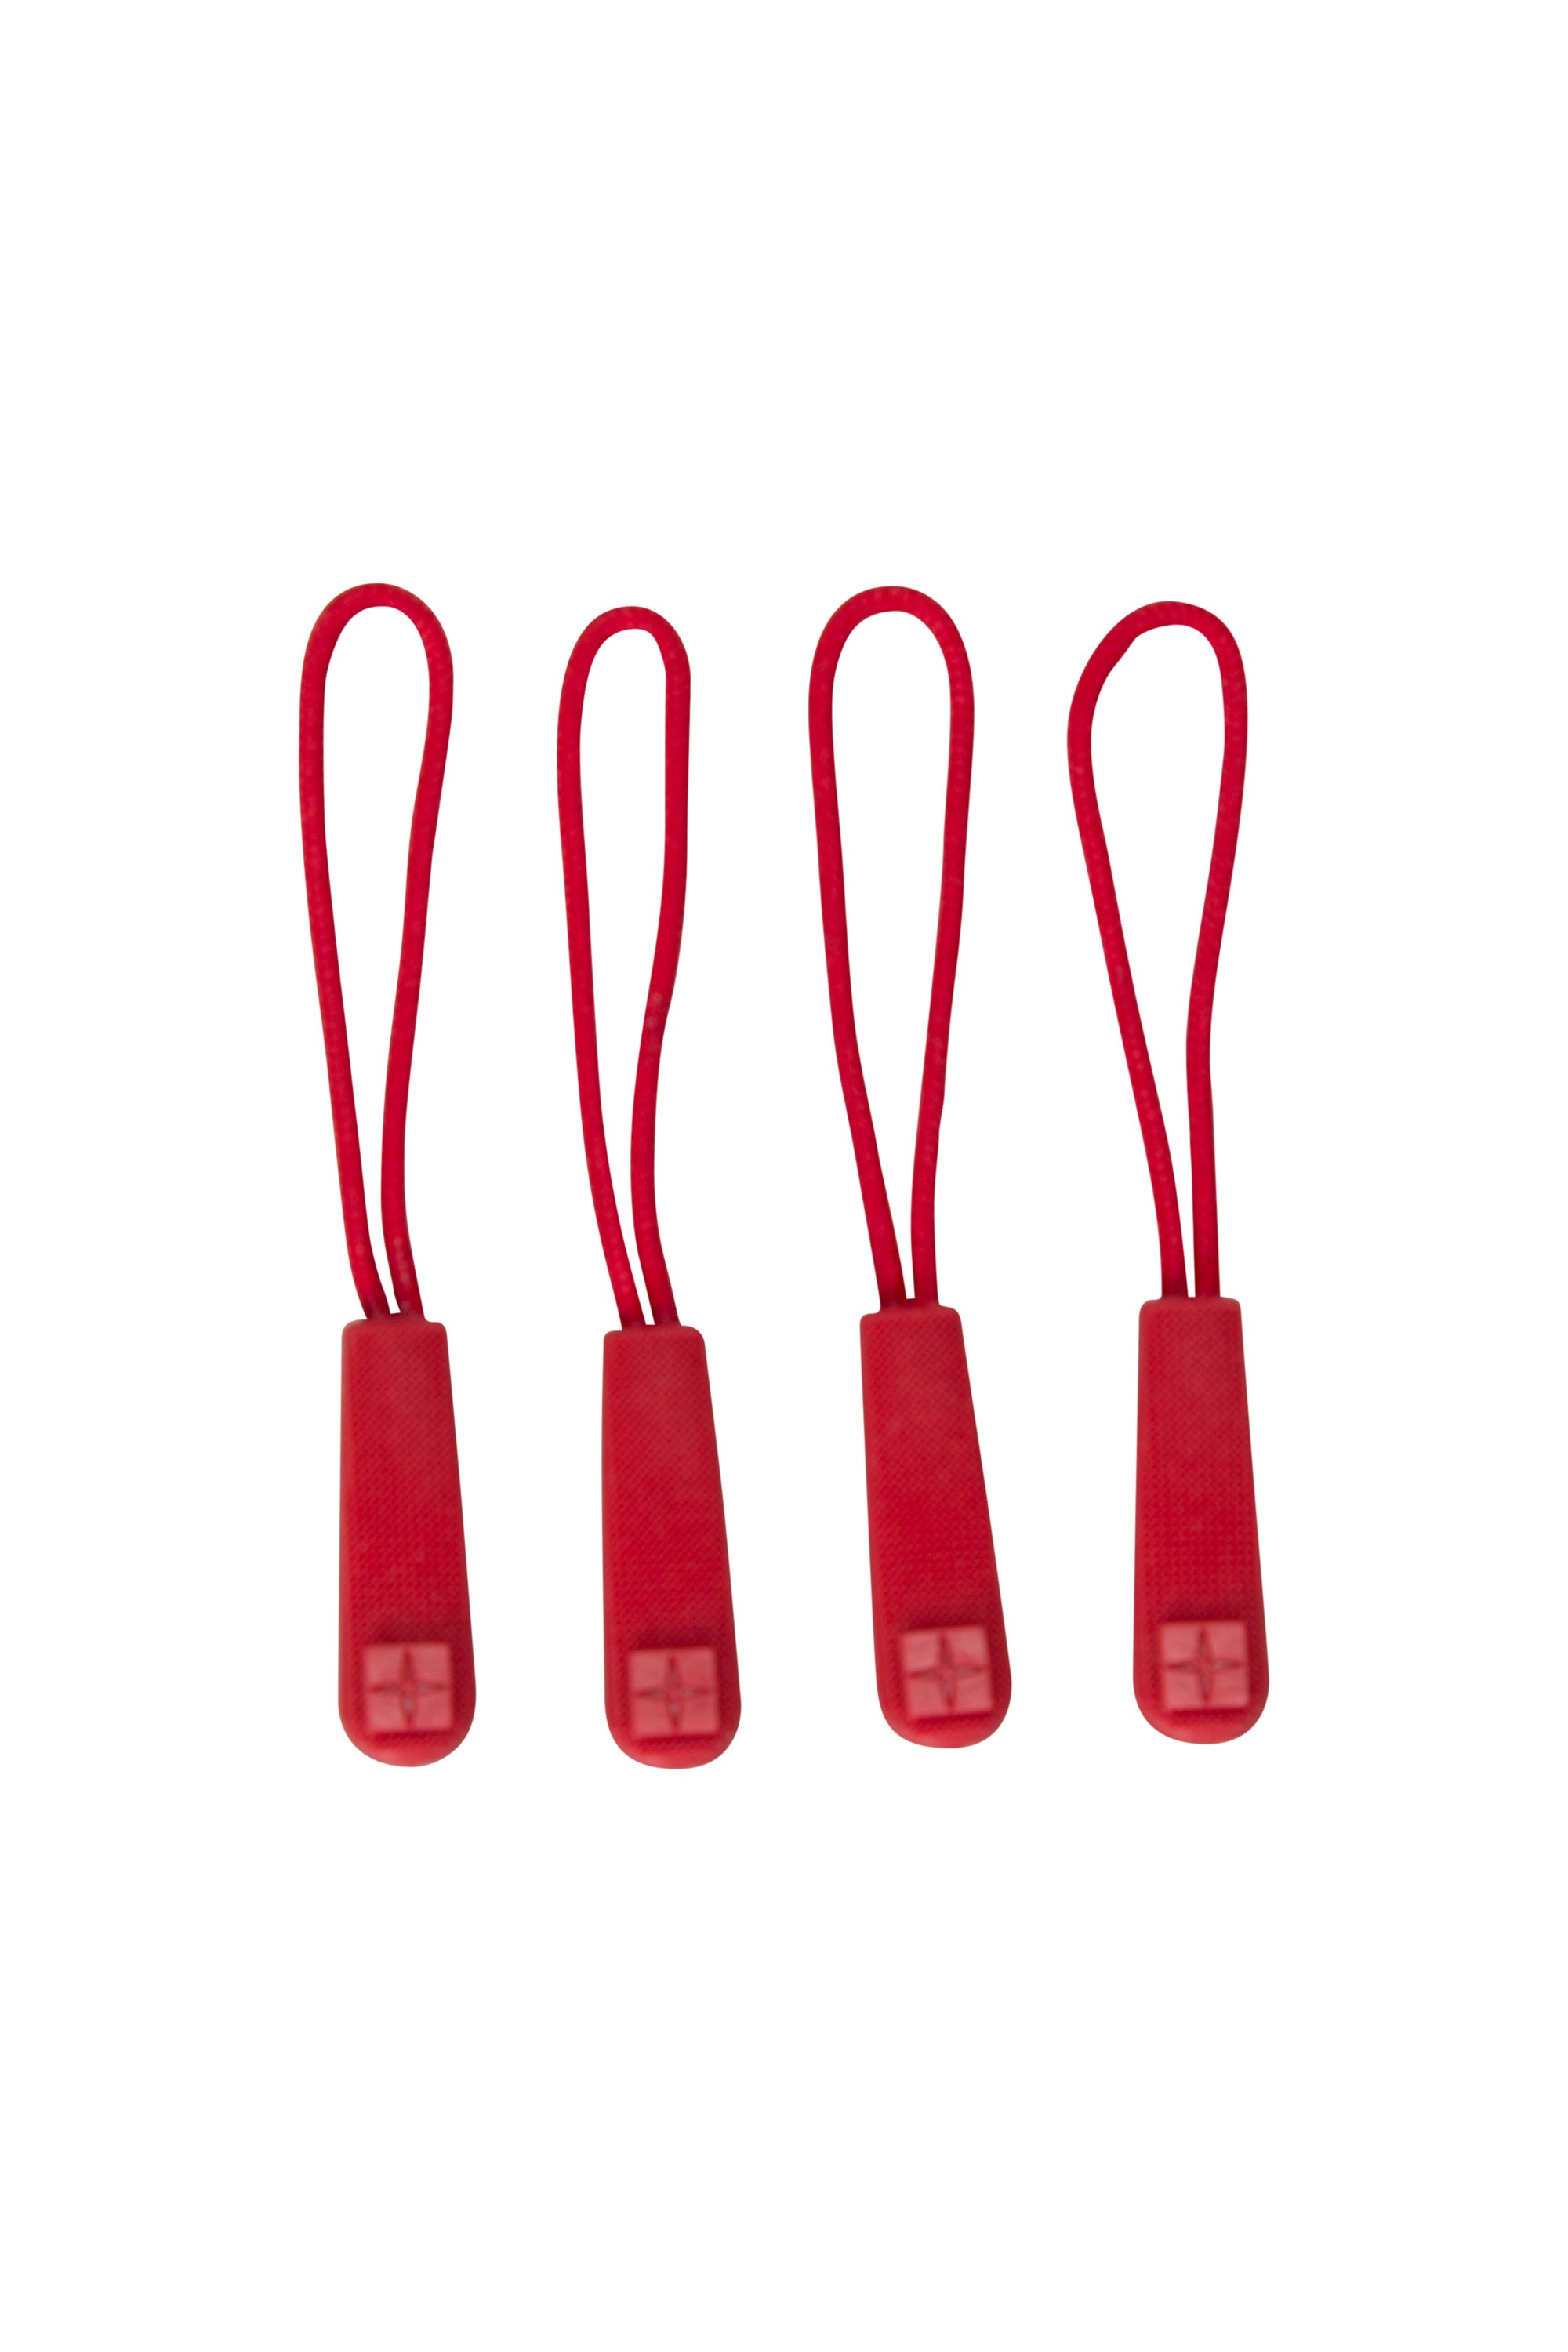 Mountain Warehouse Spare Zip Pullers 4 Pack Red